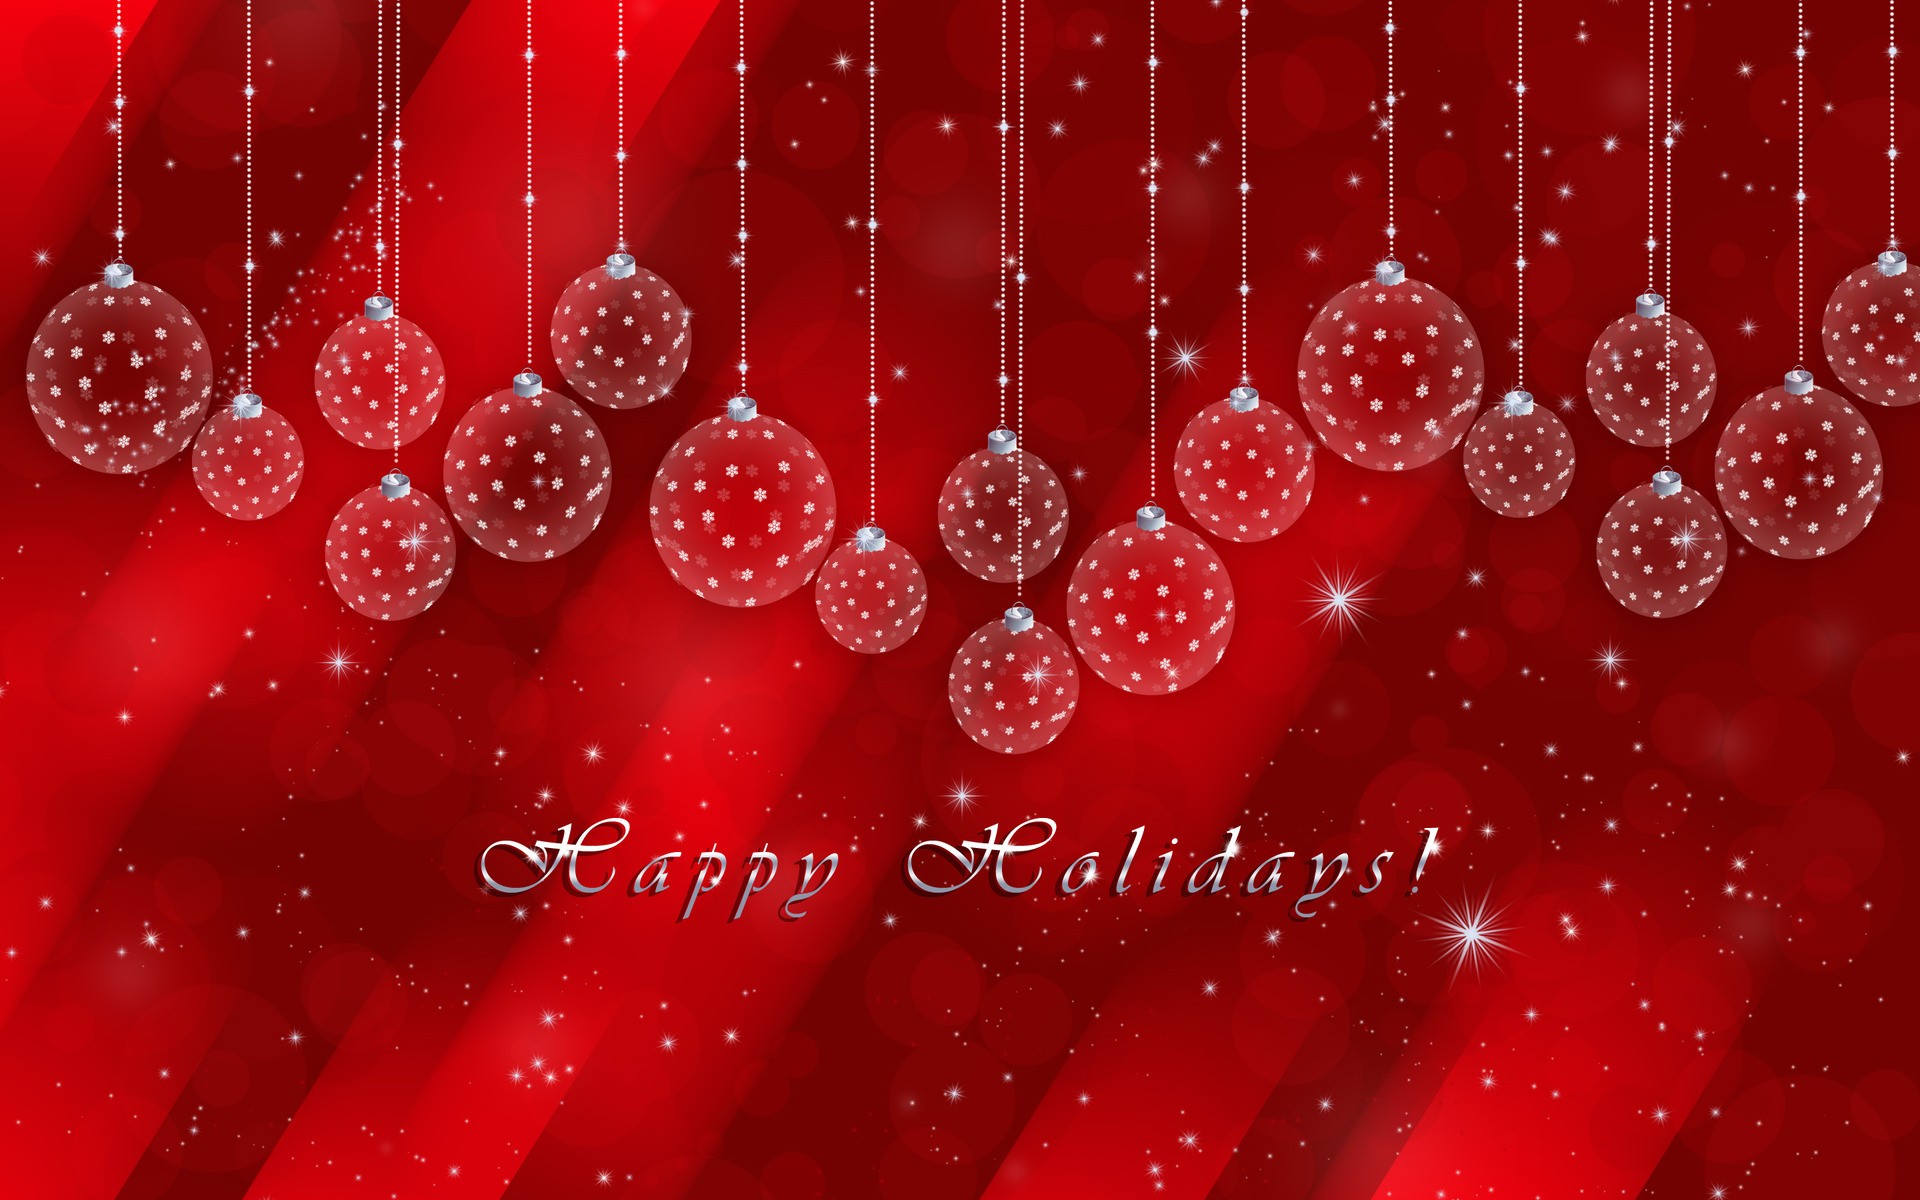 Happy Holiday High Quality Wallpaper Image Full For